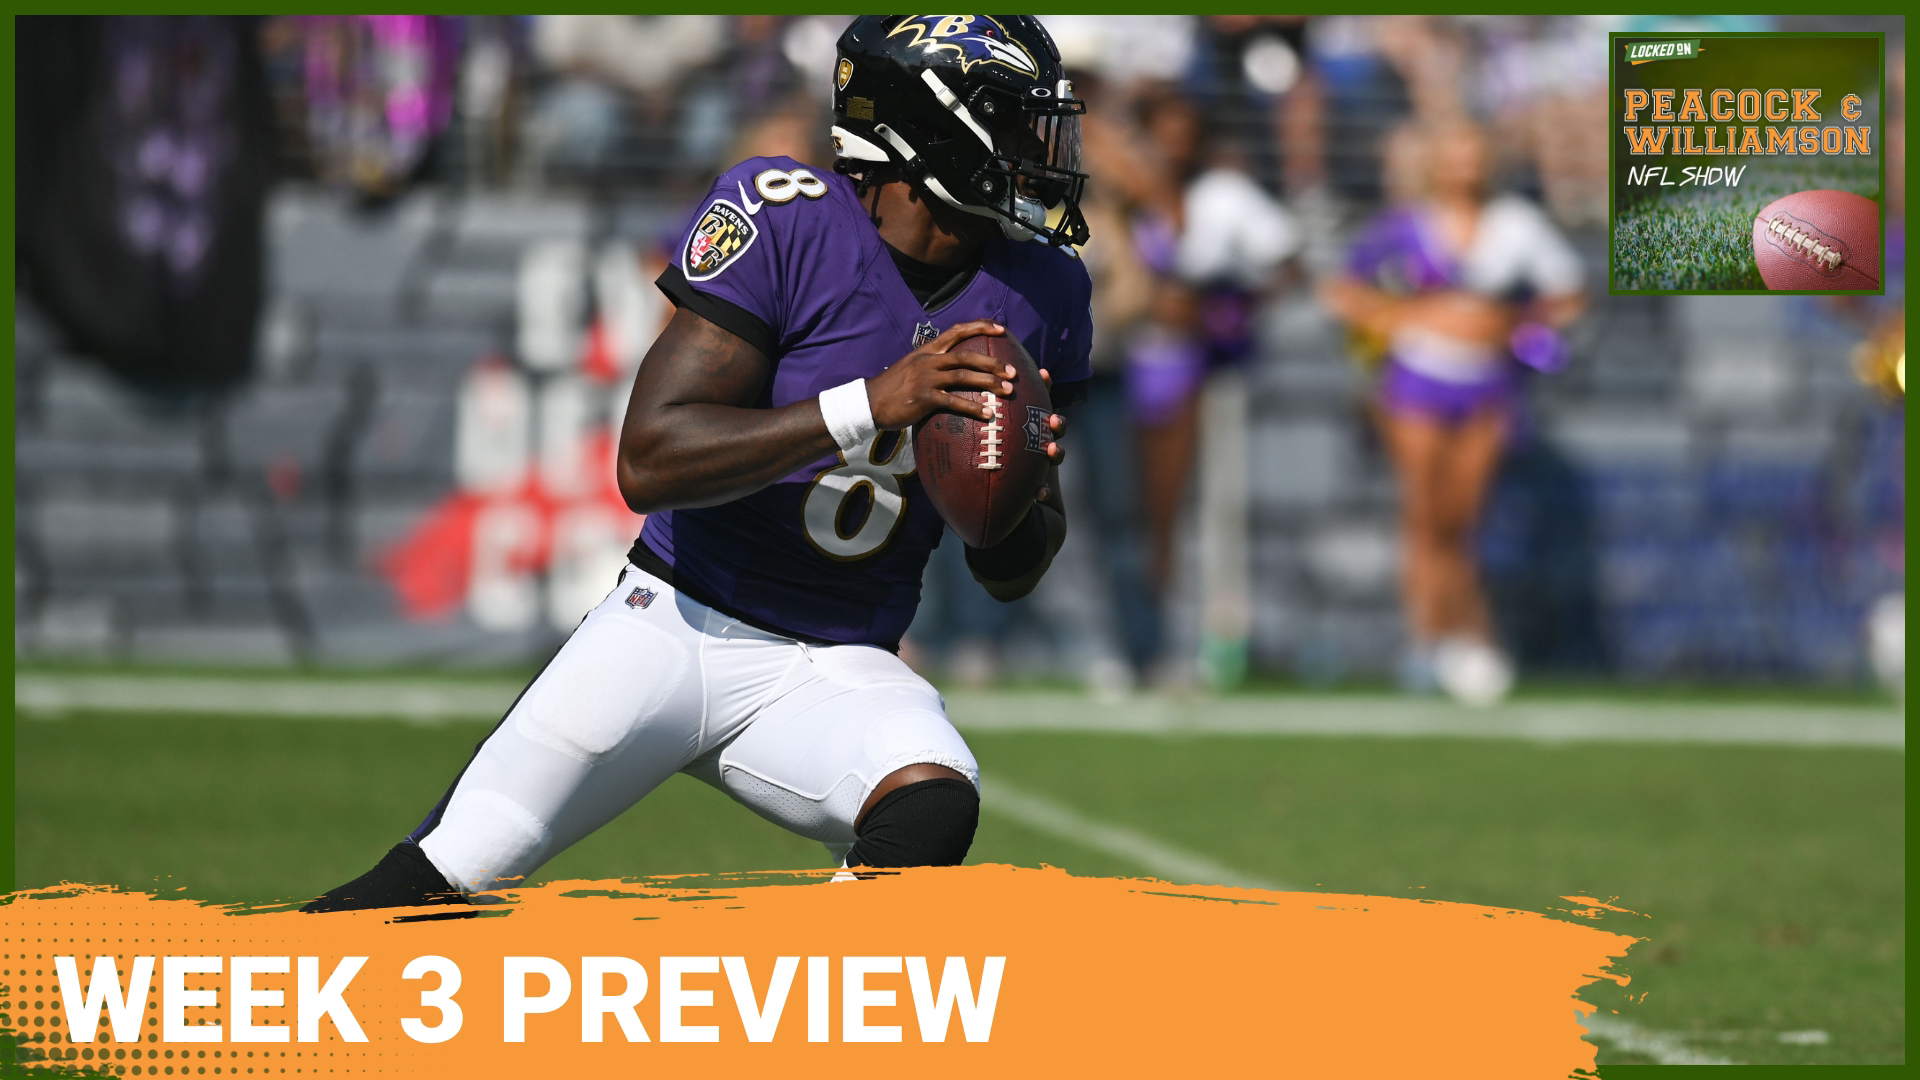 Brian Peacock and Matt Williamson preview week 3 of the NFL, including Monday night football. Plus their picks for Sunday's matchups.